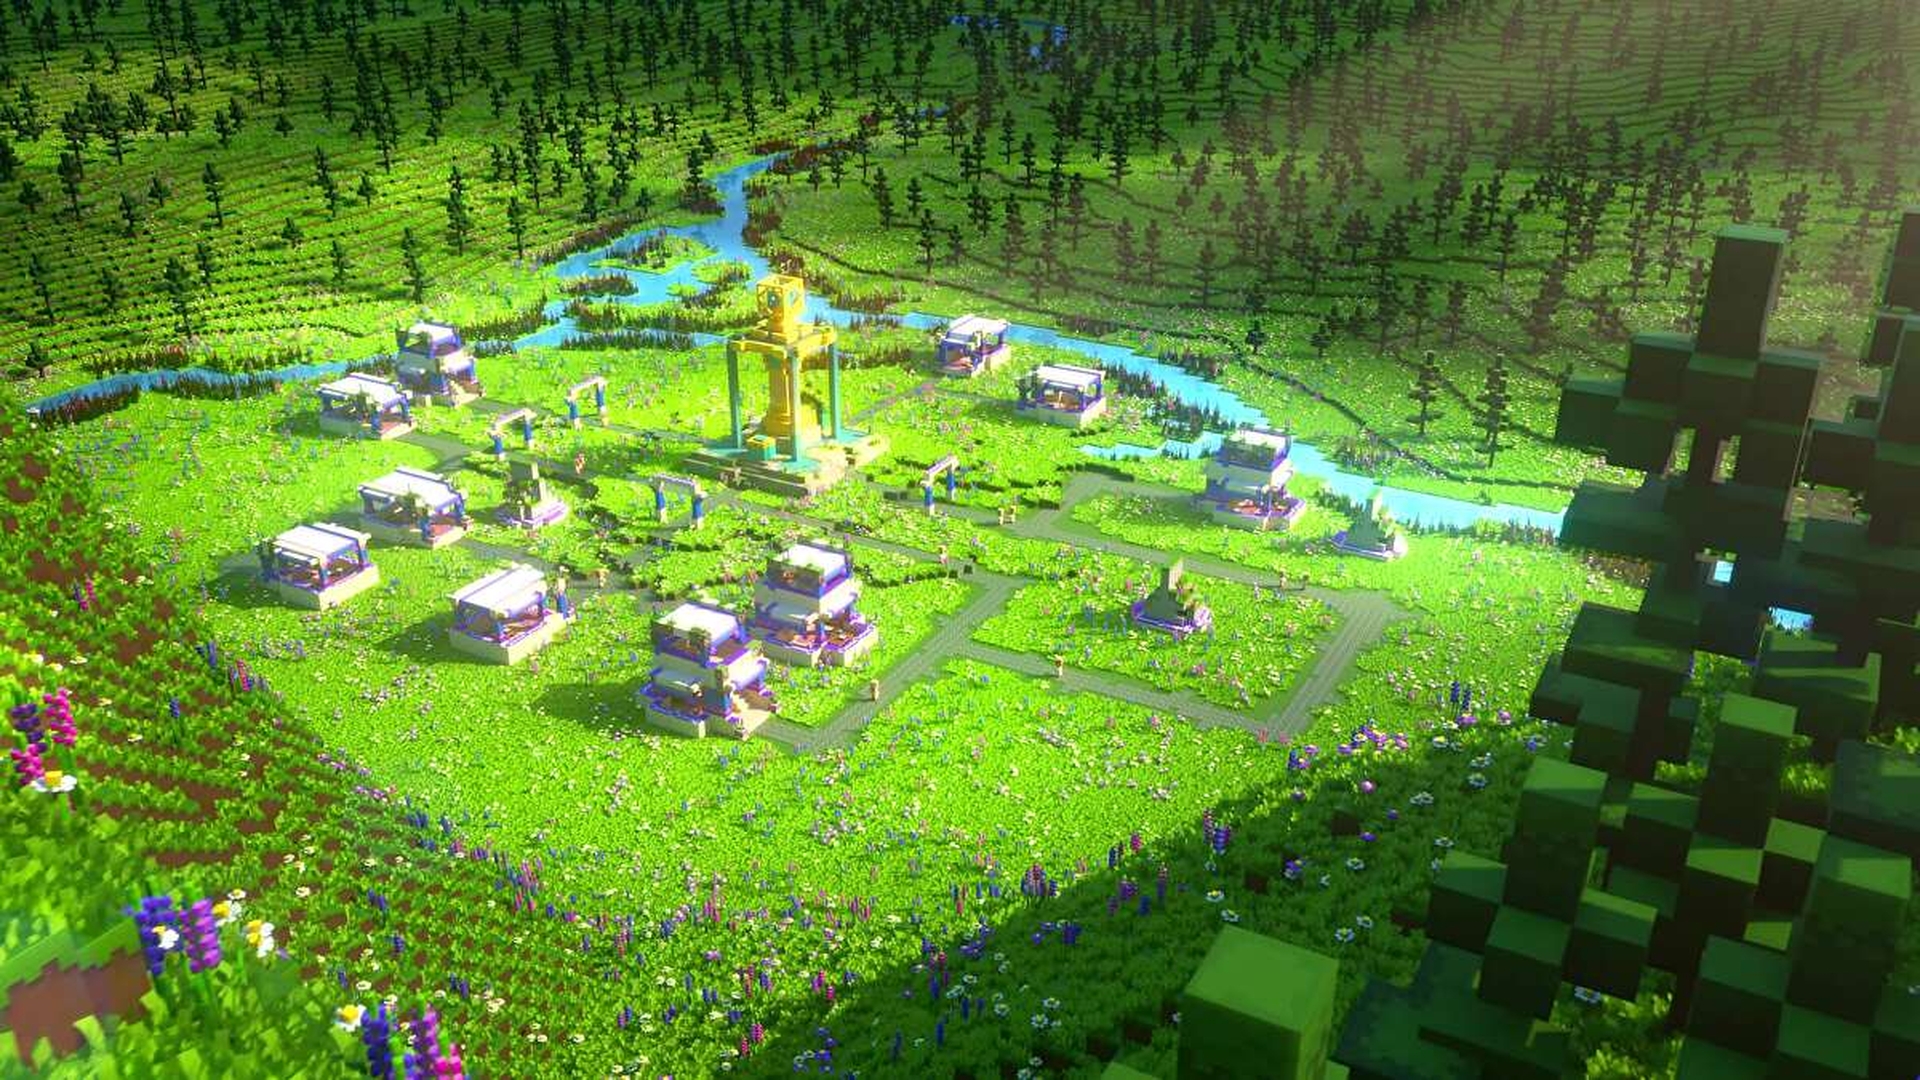 In this article, we are going to cover Minecraft Legends release date, trailer, and more, everything we know so far about the new open world RPG game.